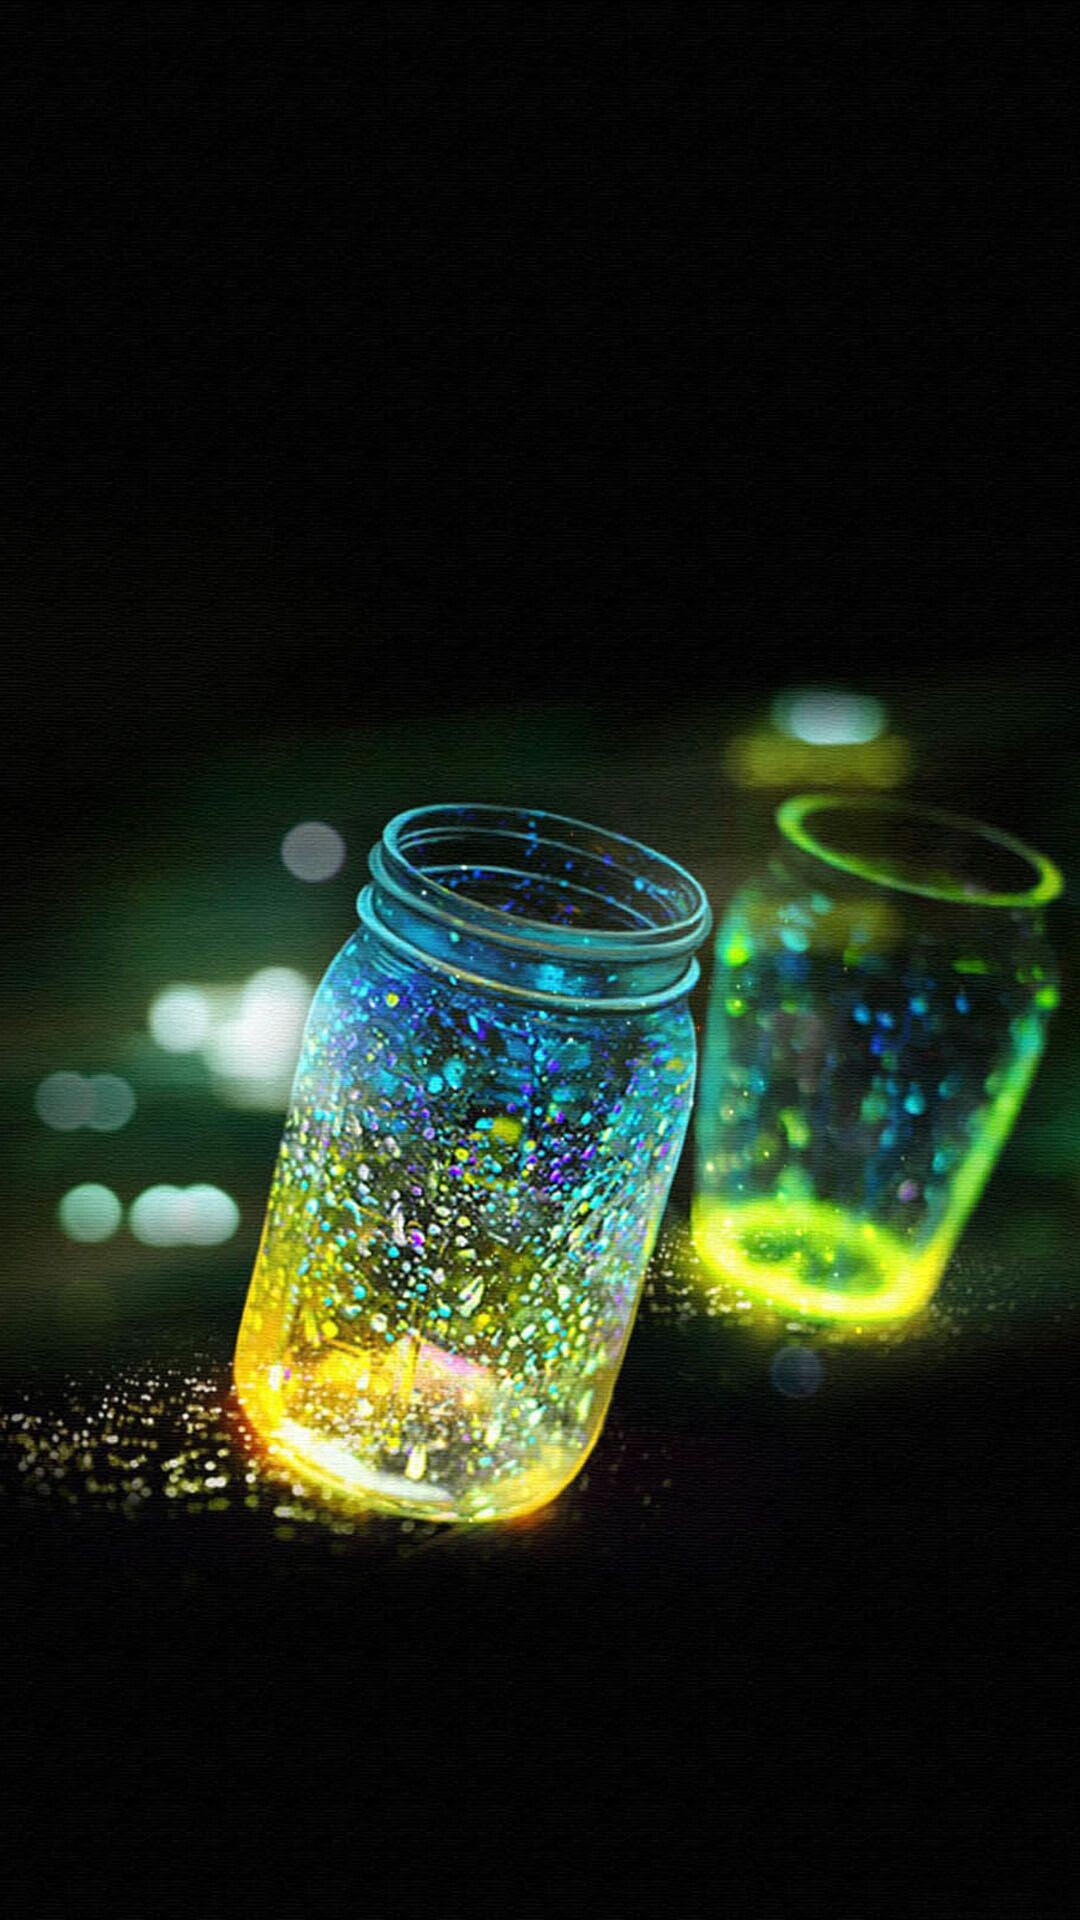 Glass: A hard, transparent material used to make windows and bottles, Multicolored jars. 1080x1920 Full HD Wallpaper.